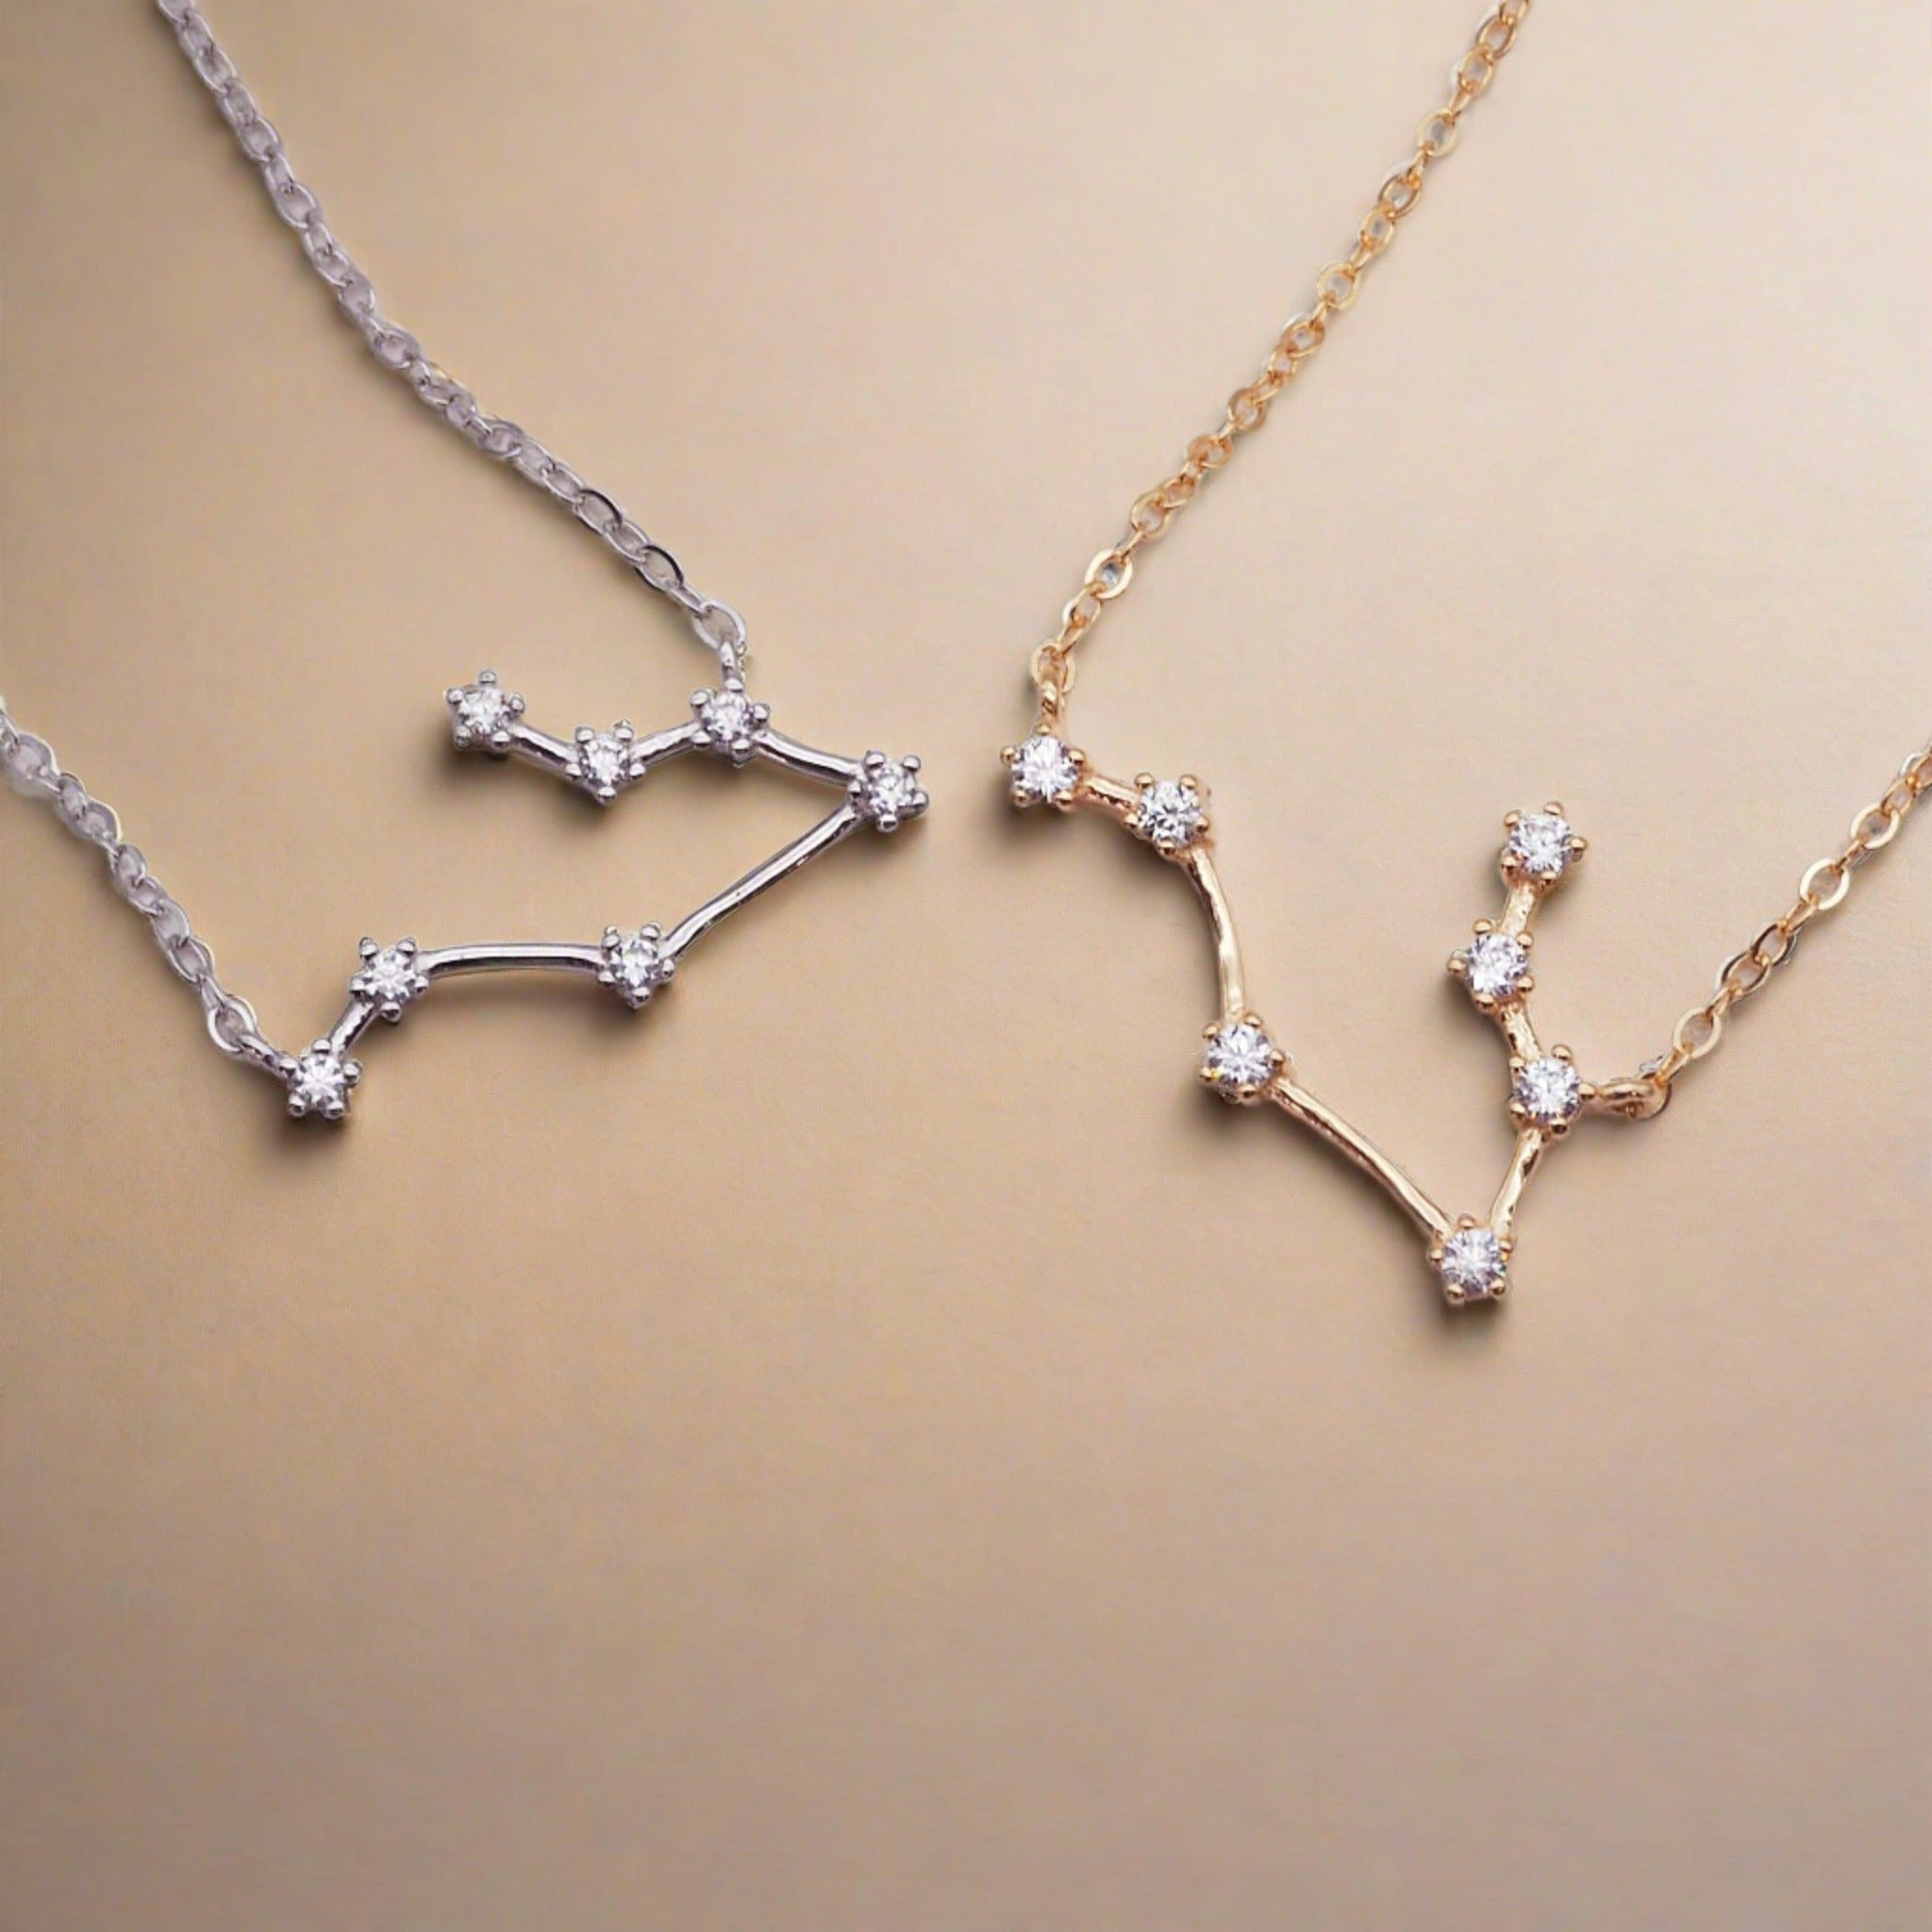 Gemini Constellation Necklace - womens jewellery by indie and harper